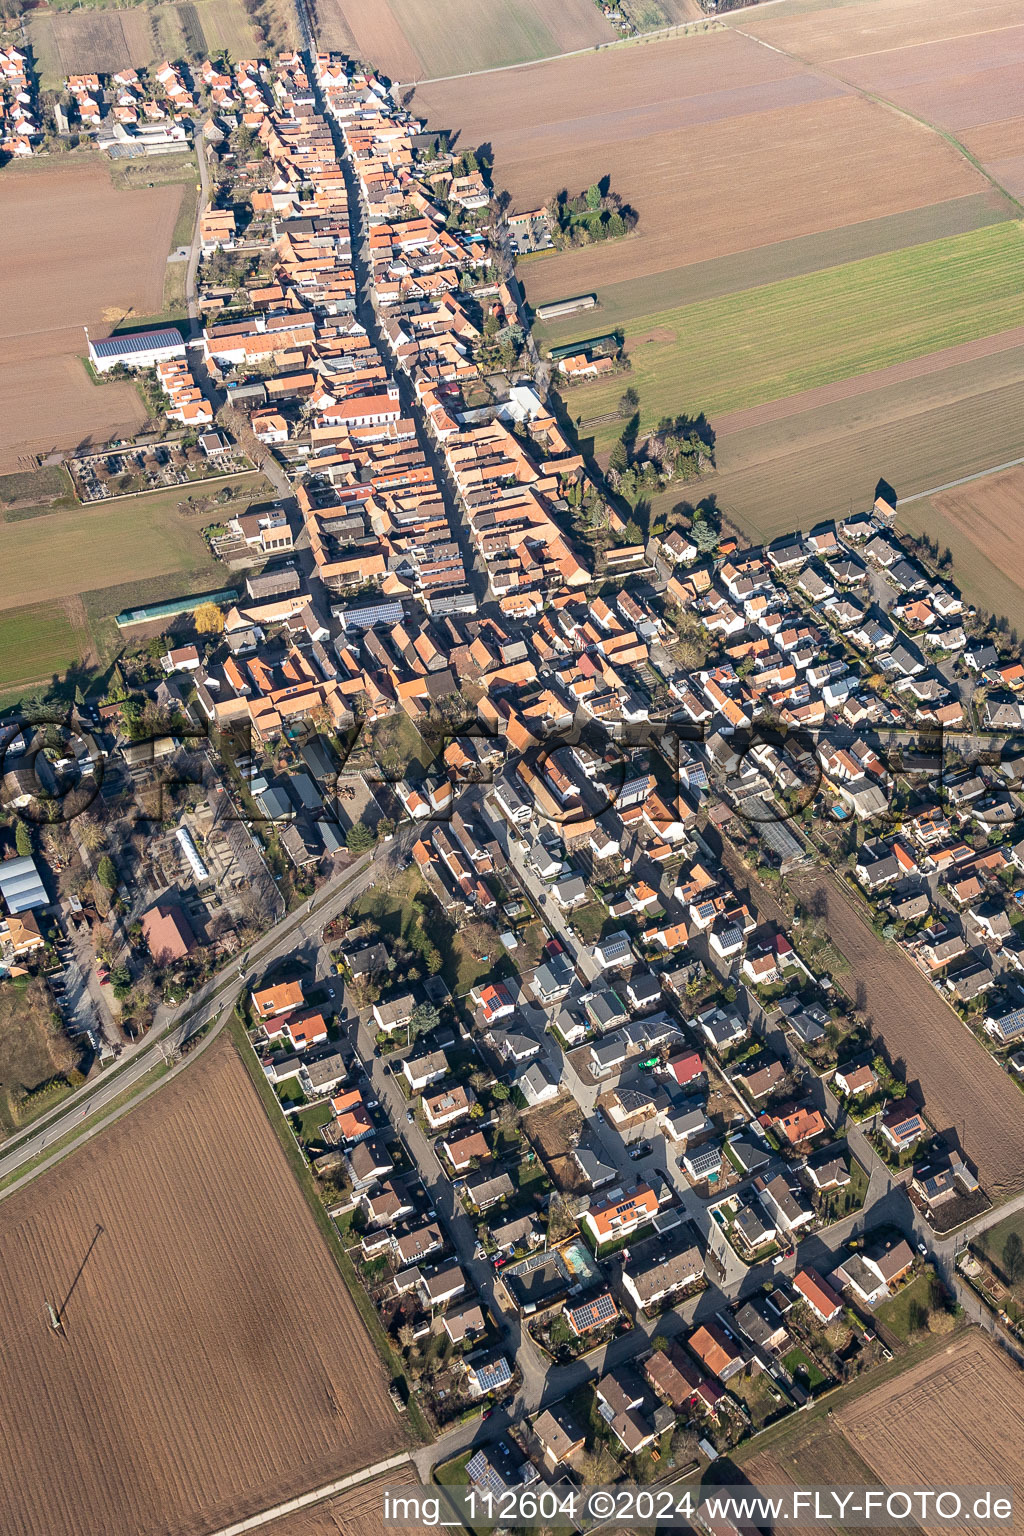 Aerial view of Village - view on the edge of agricultural fields and farmland in the district Hayna in Herxheim bei Landau (Pfalz) in the state Rhineland-Palatinate, Germany